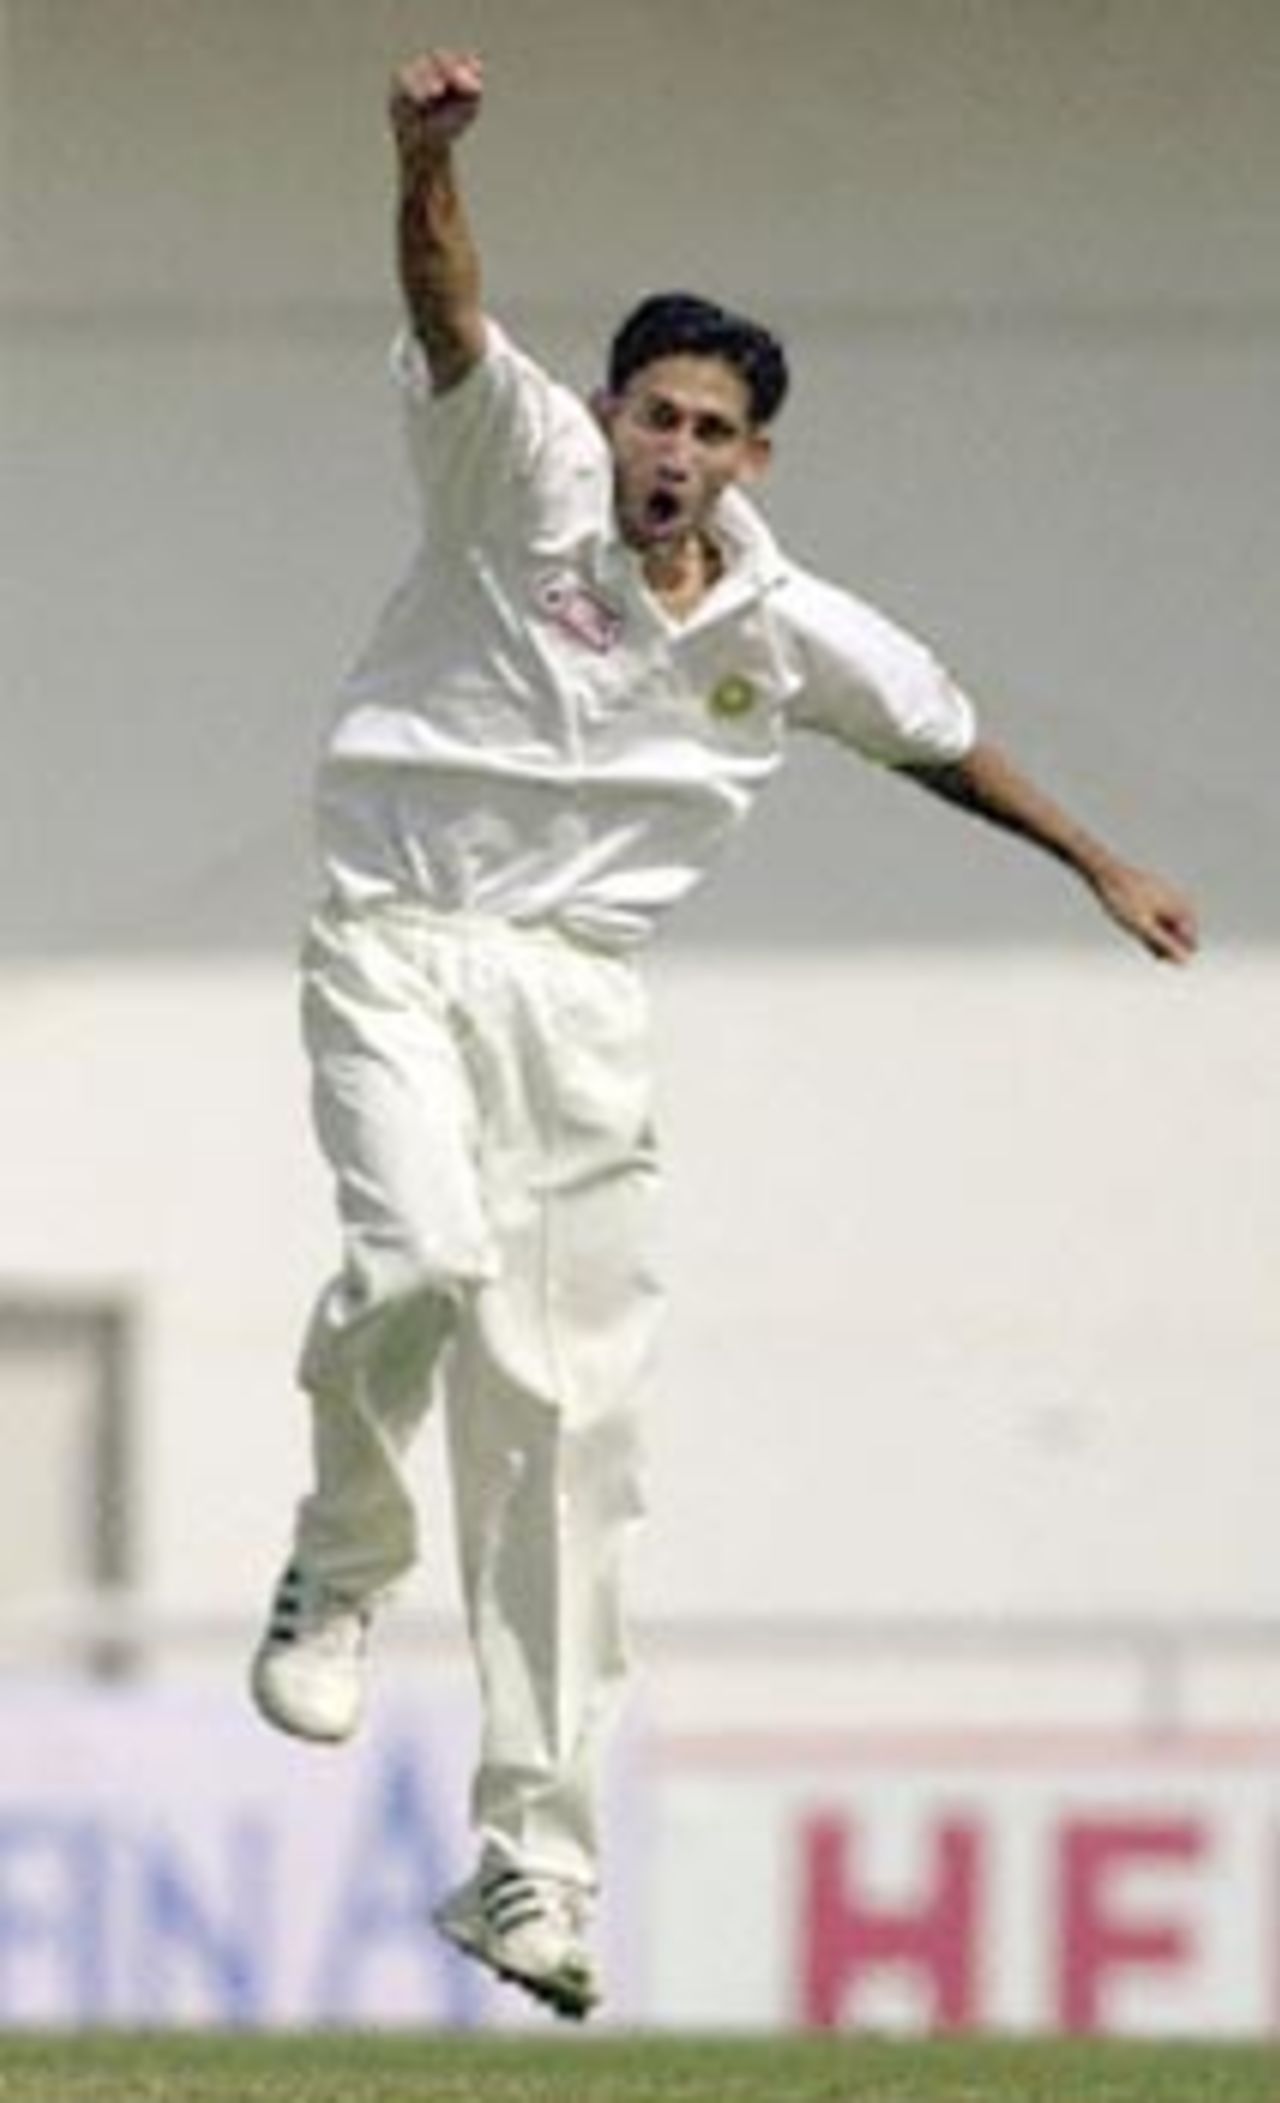 Indian pace bowler Ajit Agarkar punches his fist in the air as he exults after taking Zimbawean batsman Stuart Carlisle's wicket on the third day 27 November 2000 of the second test match between India and Zimbabwe in Nagpur. Carlisle was out for 51 as Zimbabwe stood at 153 for 2 at lunch.